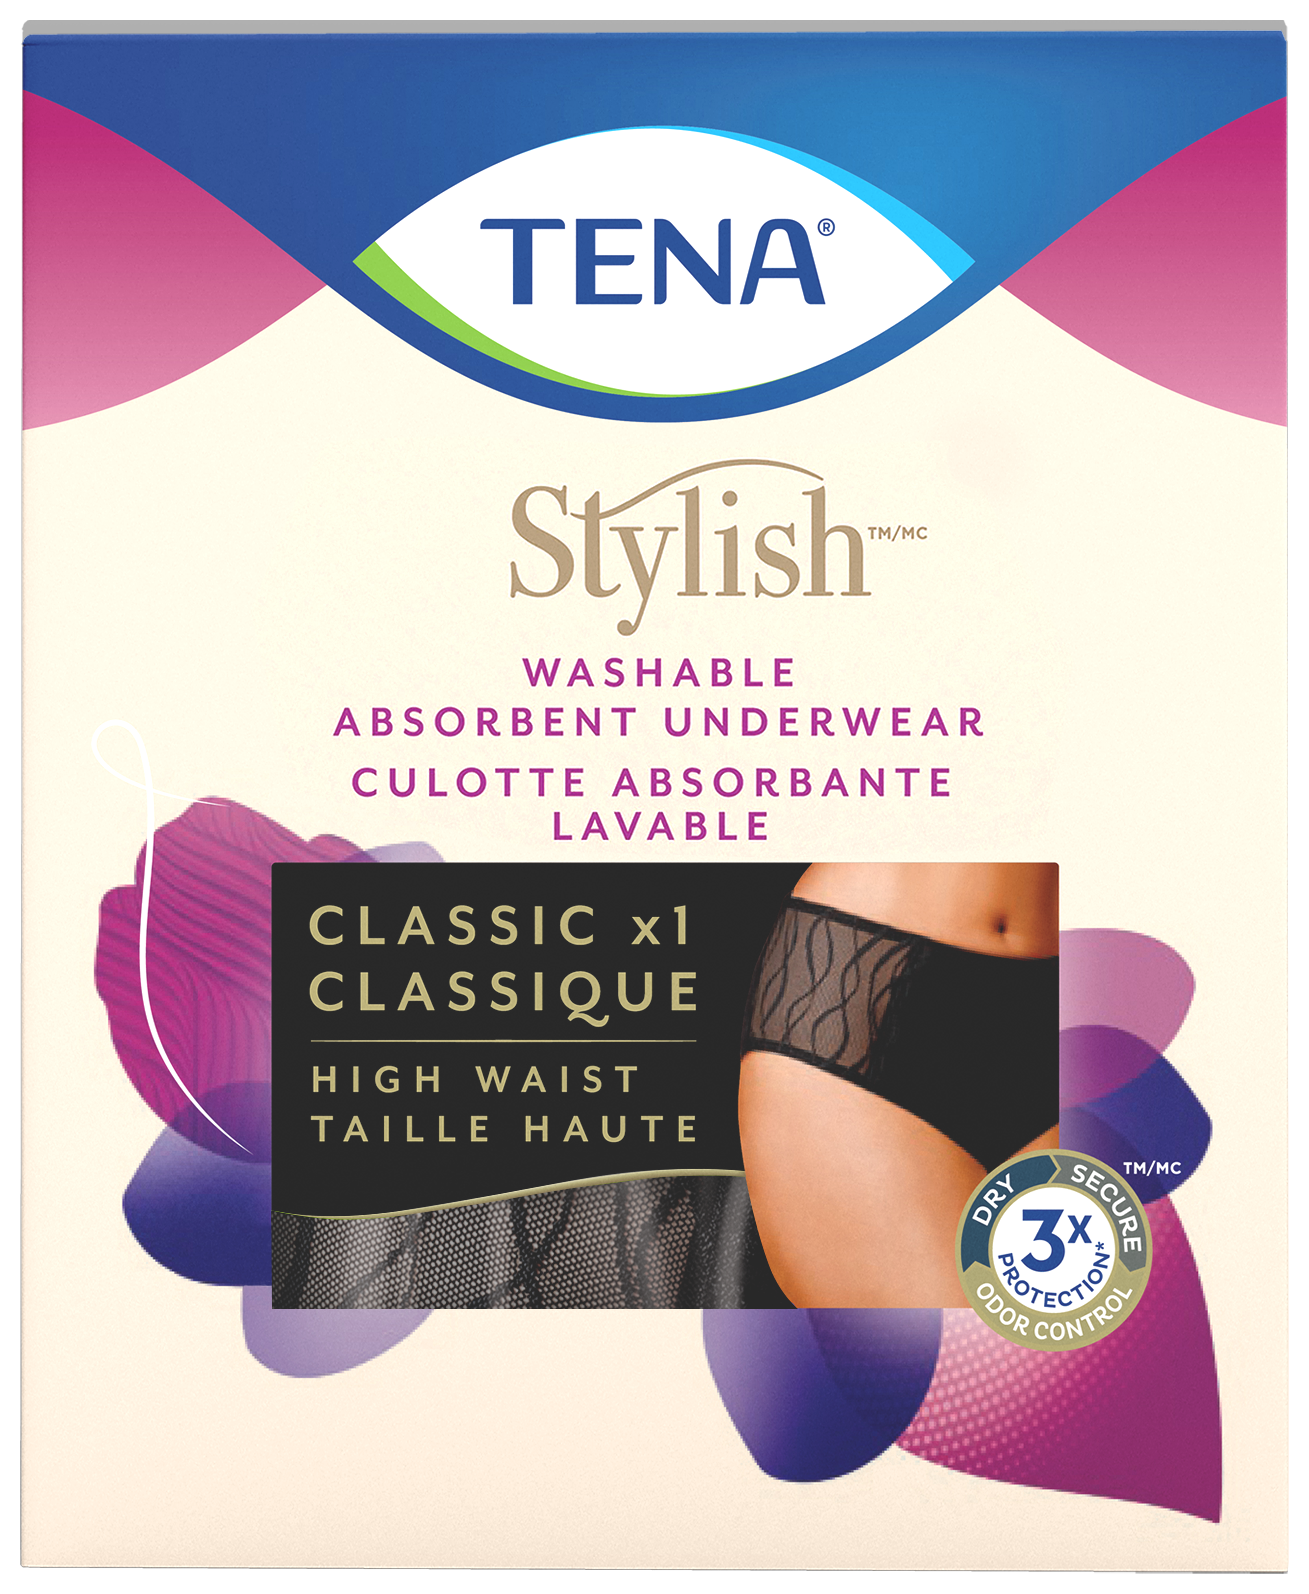 Discreet & secure incontinence pads and underwear for women by TENA